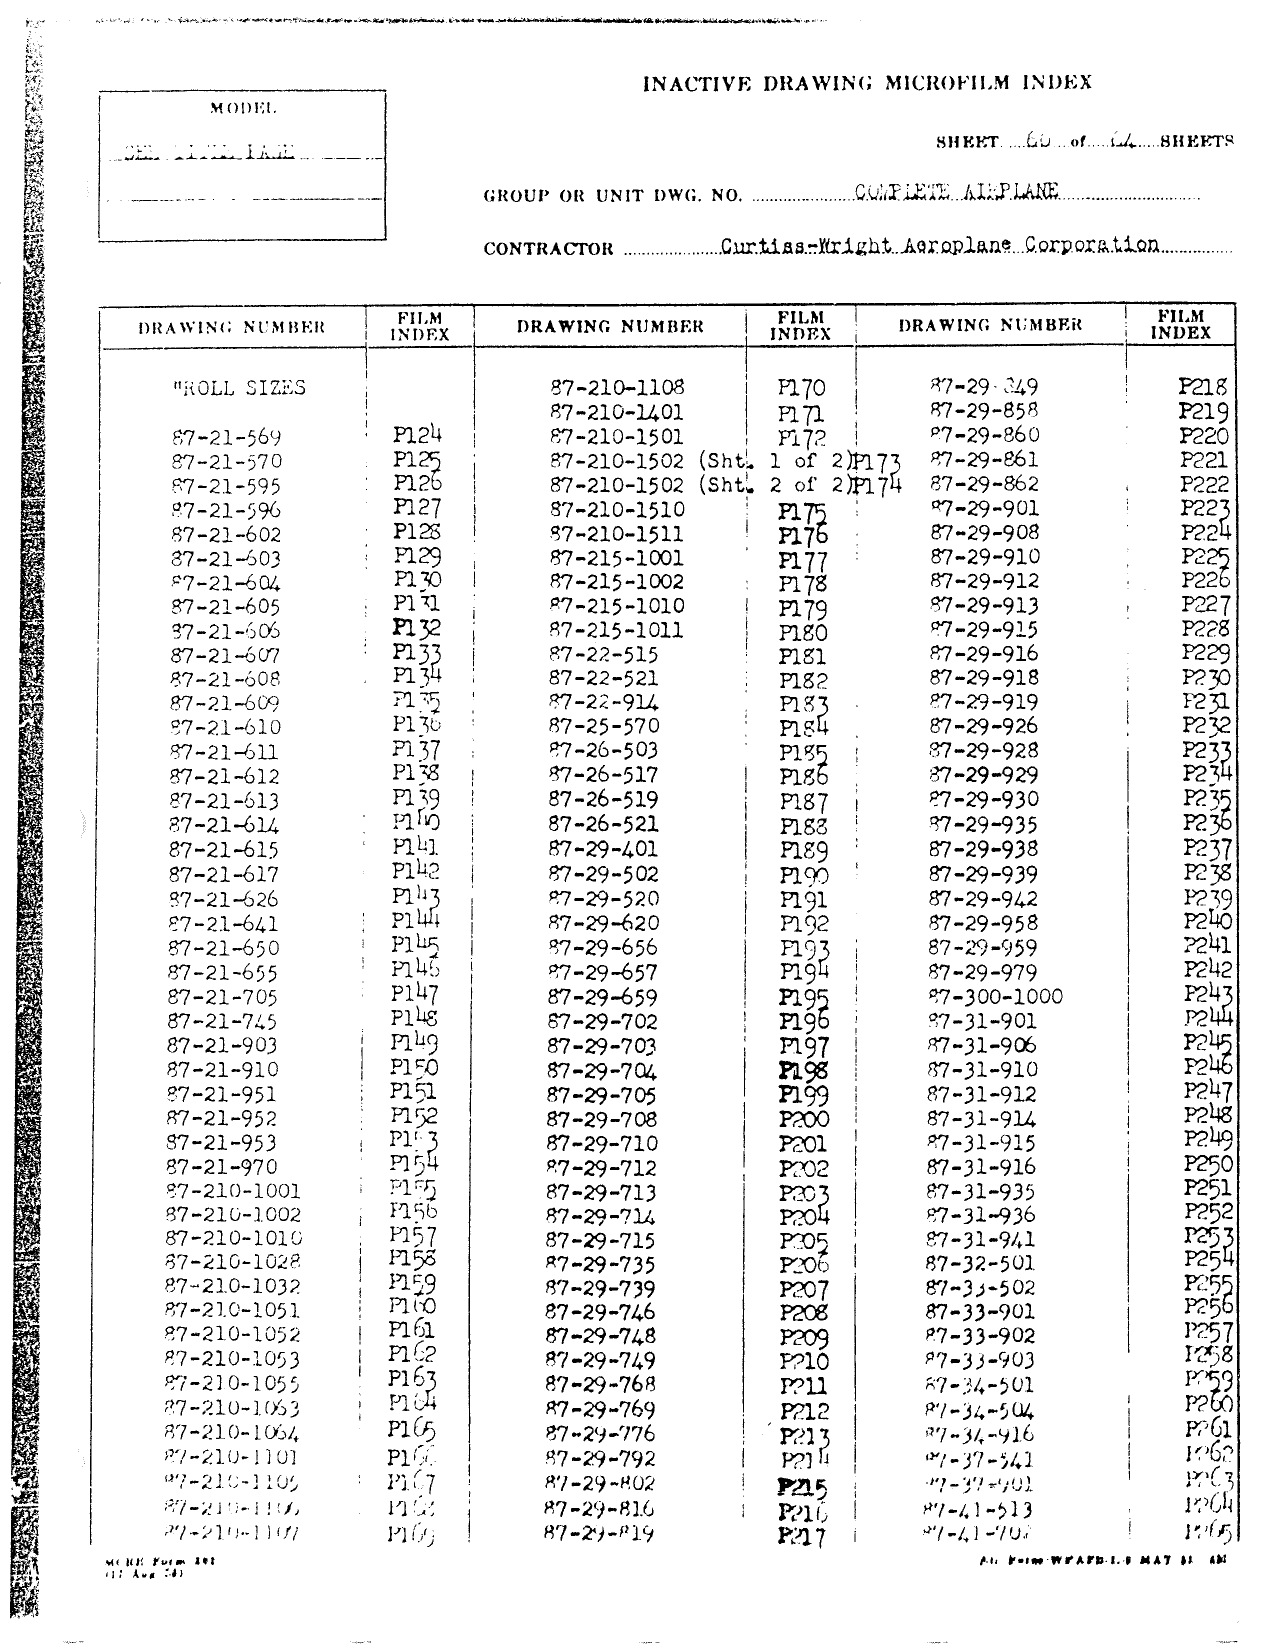 Sample page 60 from AirCorps Library document: P40 Drawing Index (Early)